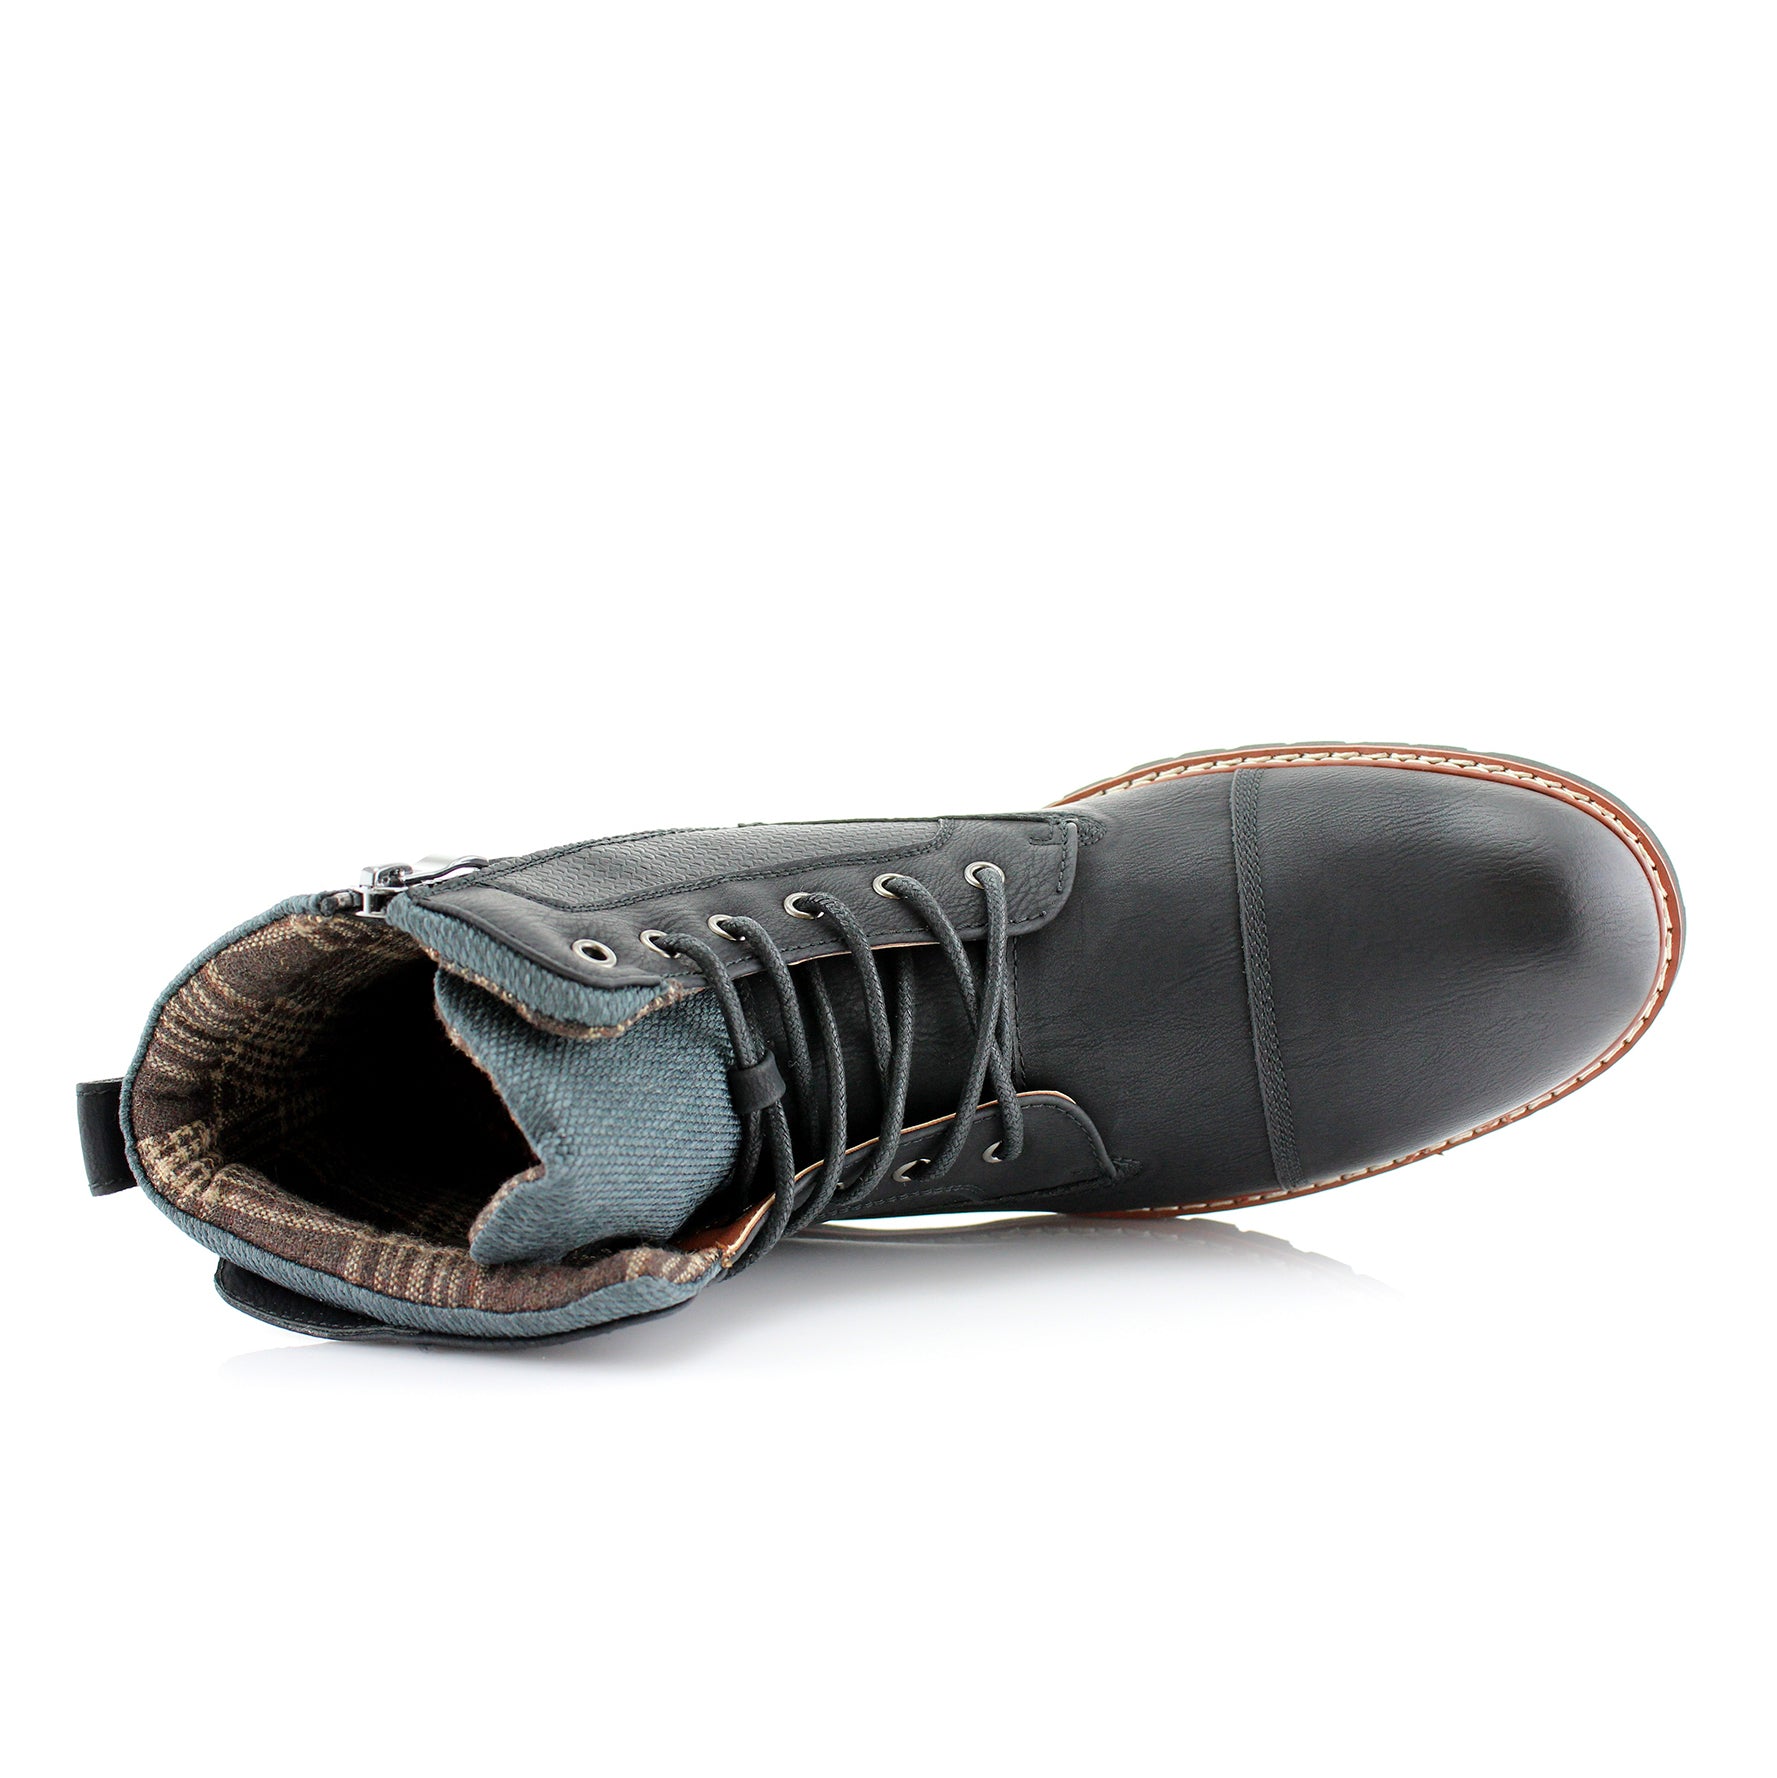 Textured Upper Combat Boots | Mcconnell by Polar Fox | Conal Footwear | Top-Down Angle View